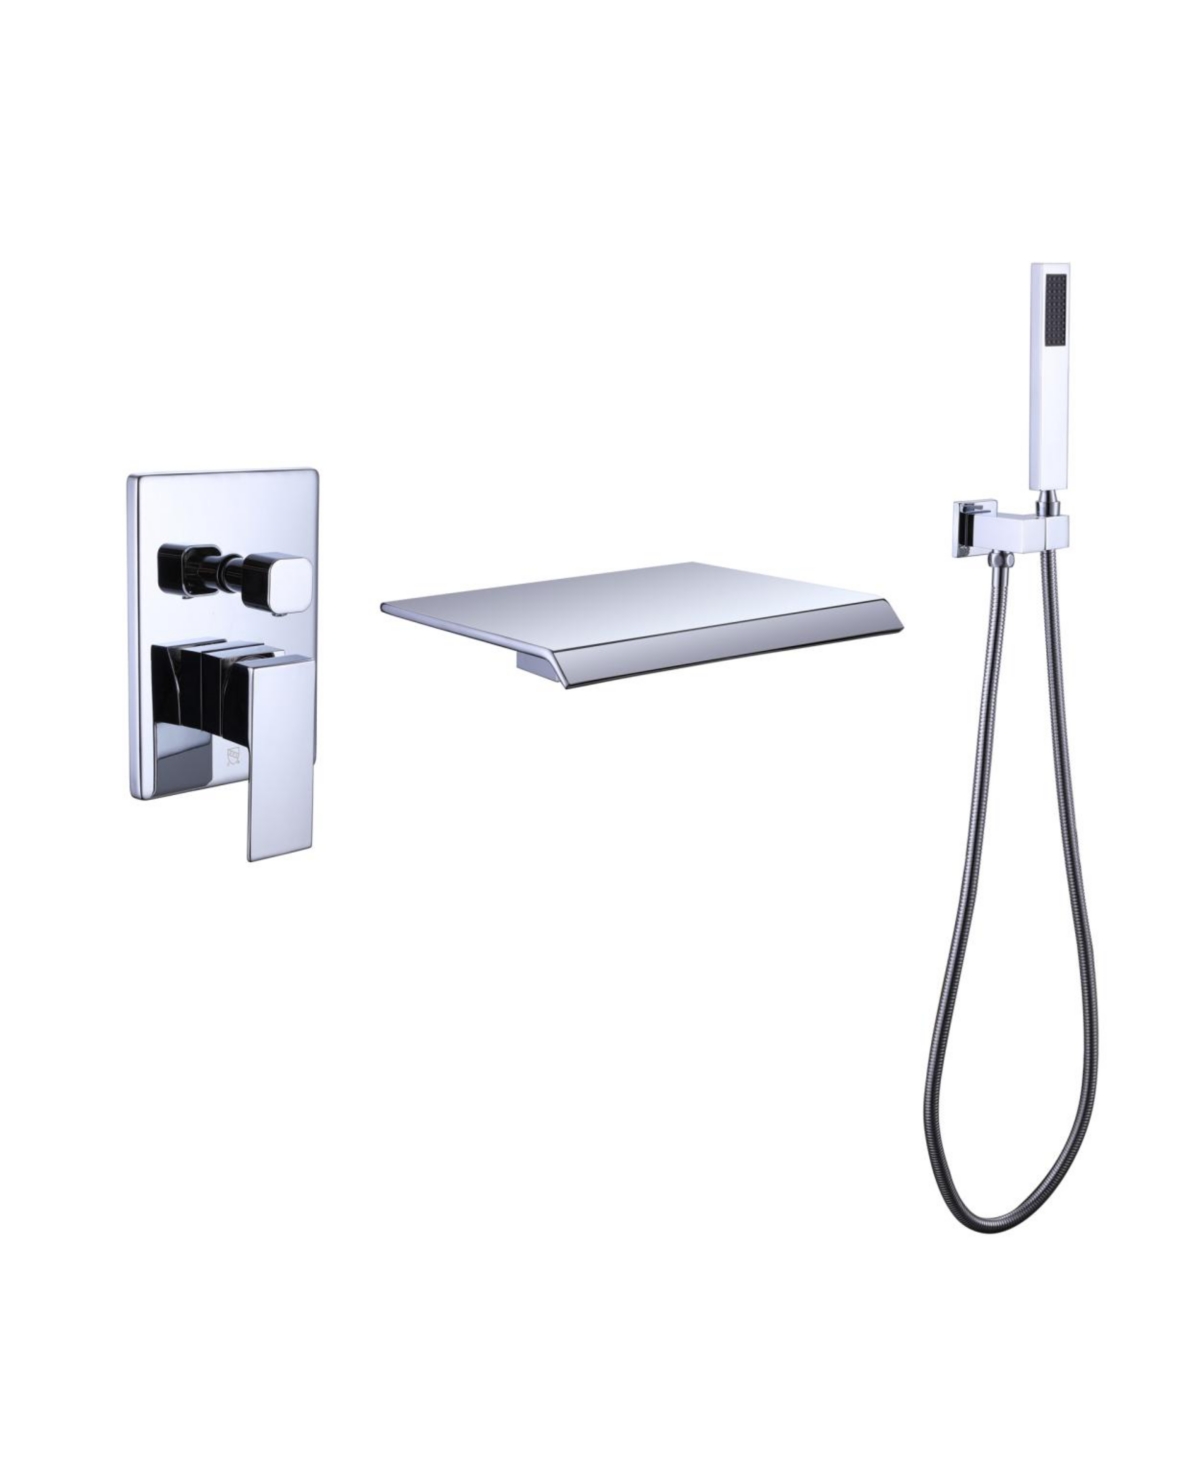 Pressure-Balance Waterfall Single Handle Wall Mount Tub Faucet With Hand Shower, Chrome - Open White